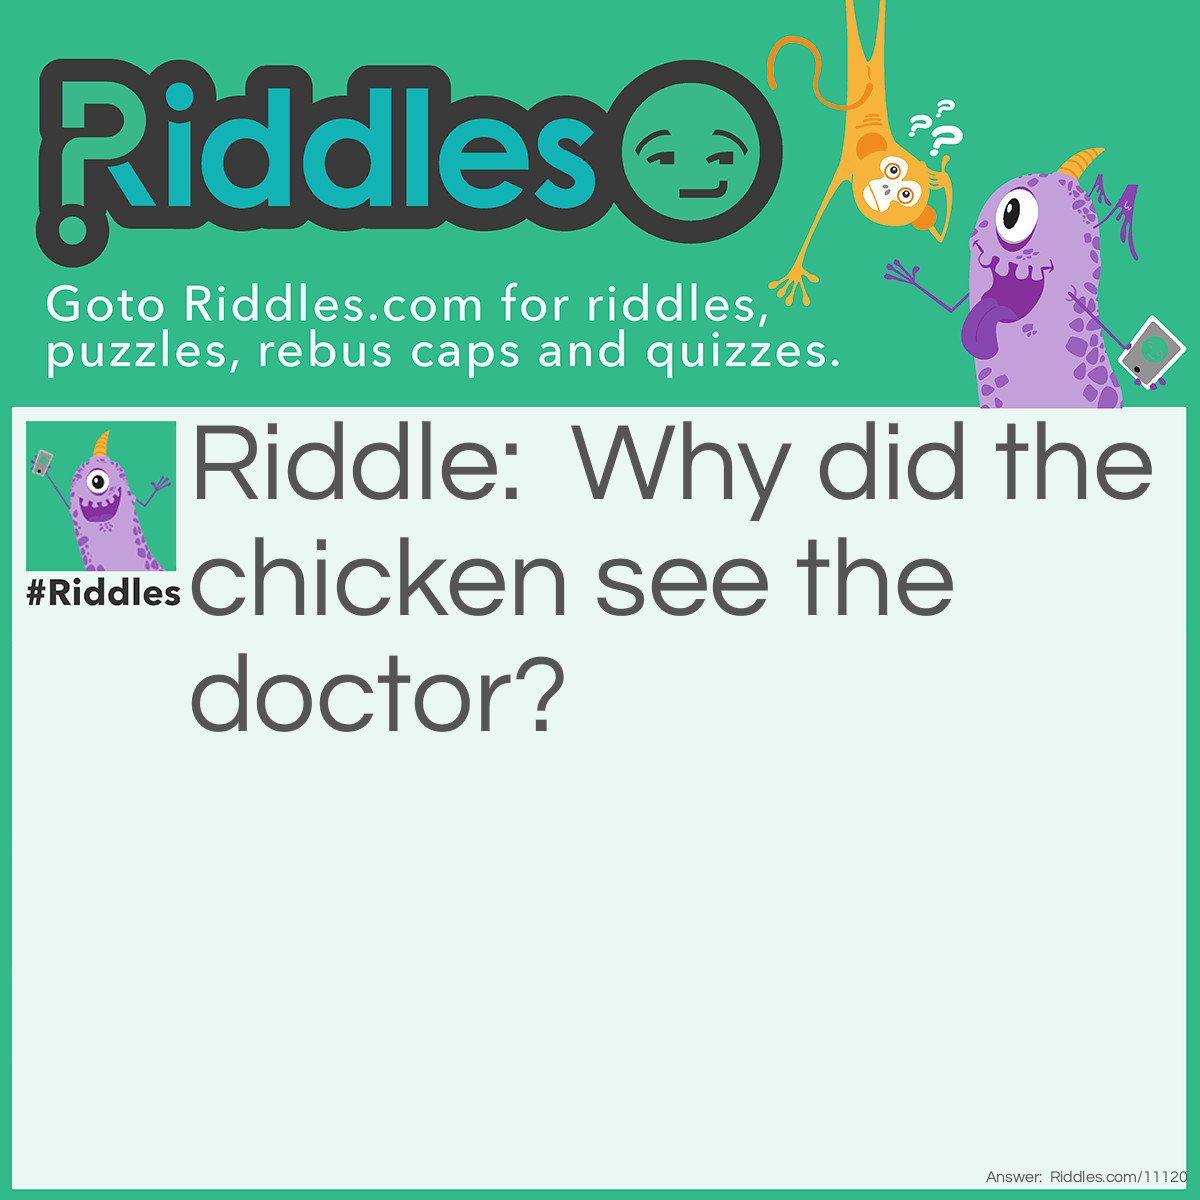 Riddle: Why did the chicken see the doctor? Answer: Because it had people pocks.